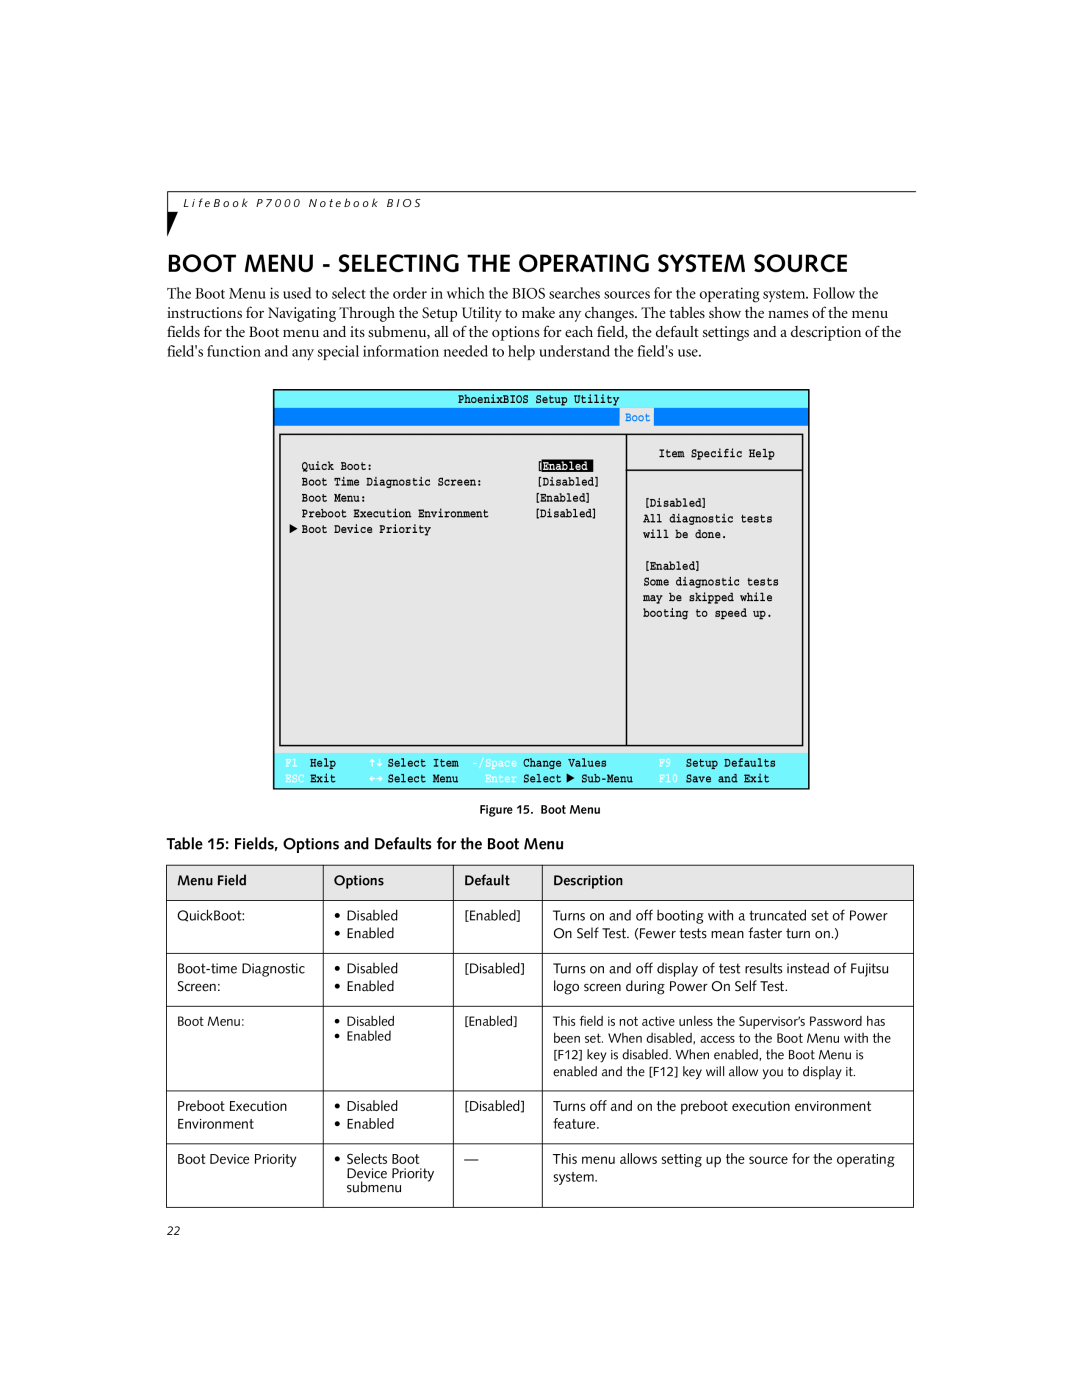 Fujitsu P1510D manual Boot Menu - Selecting The Operating System Source, Fields, Options and Defaults for the Boot Menu 